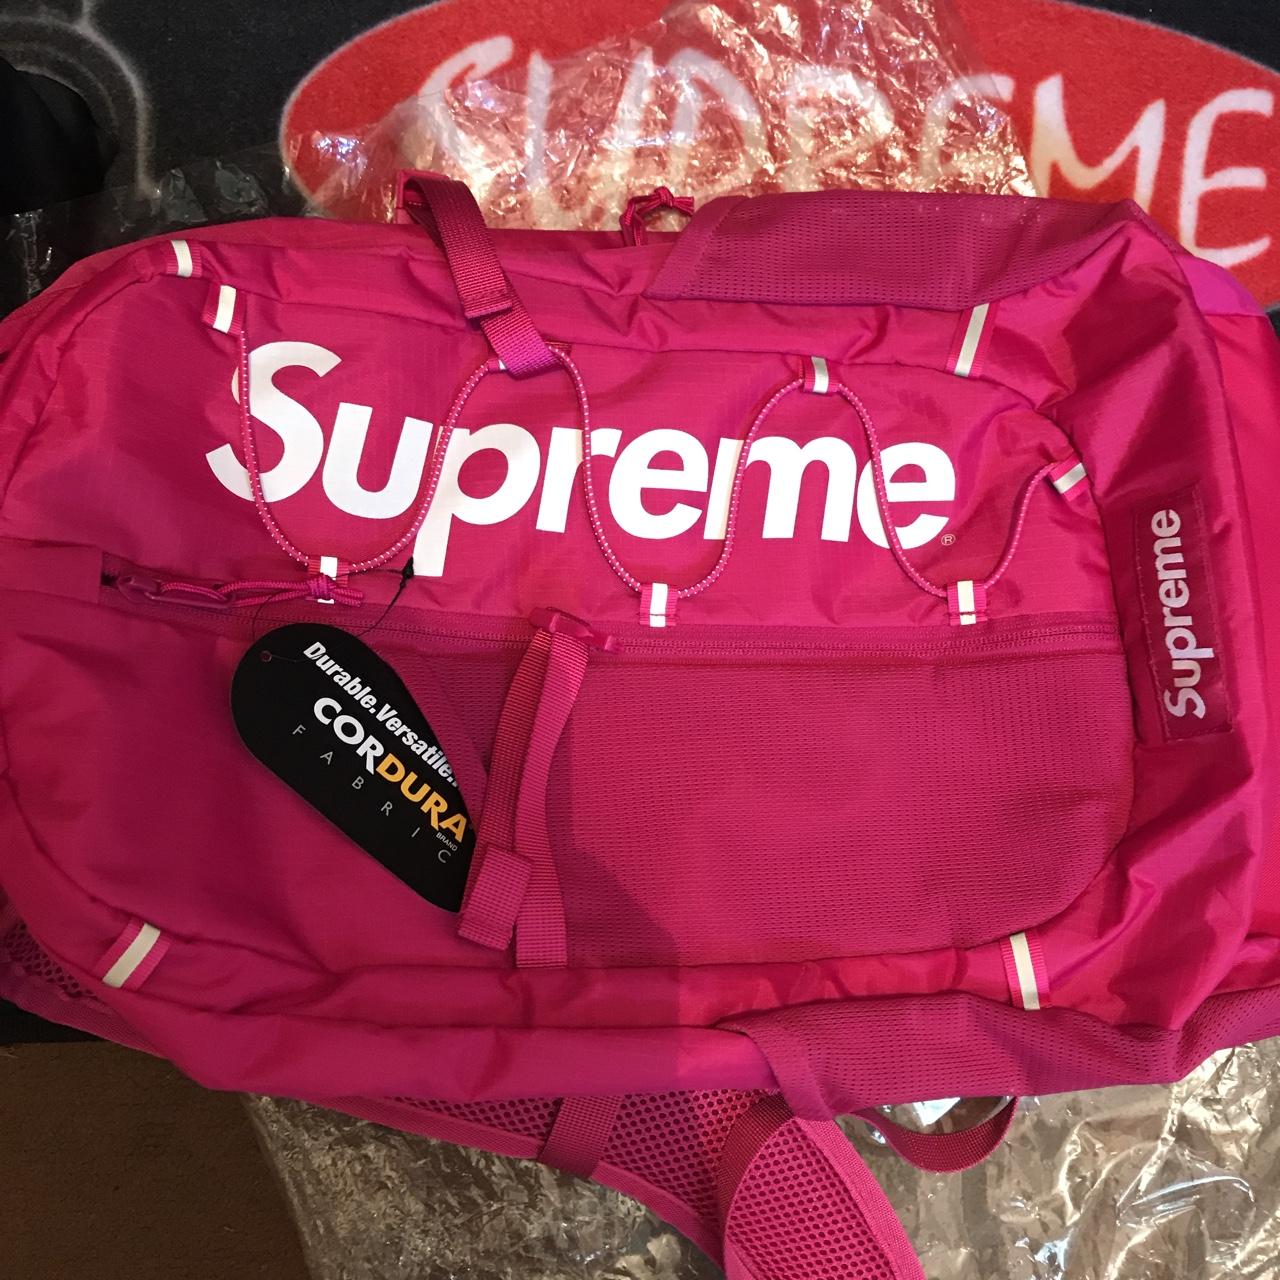 Dope red supreme backpack perfect for going to - Depop